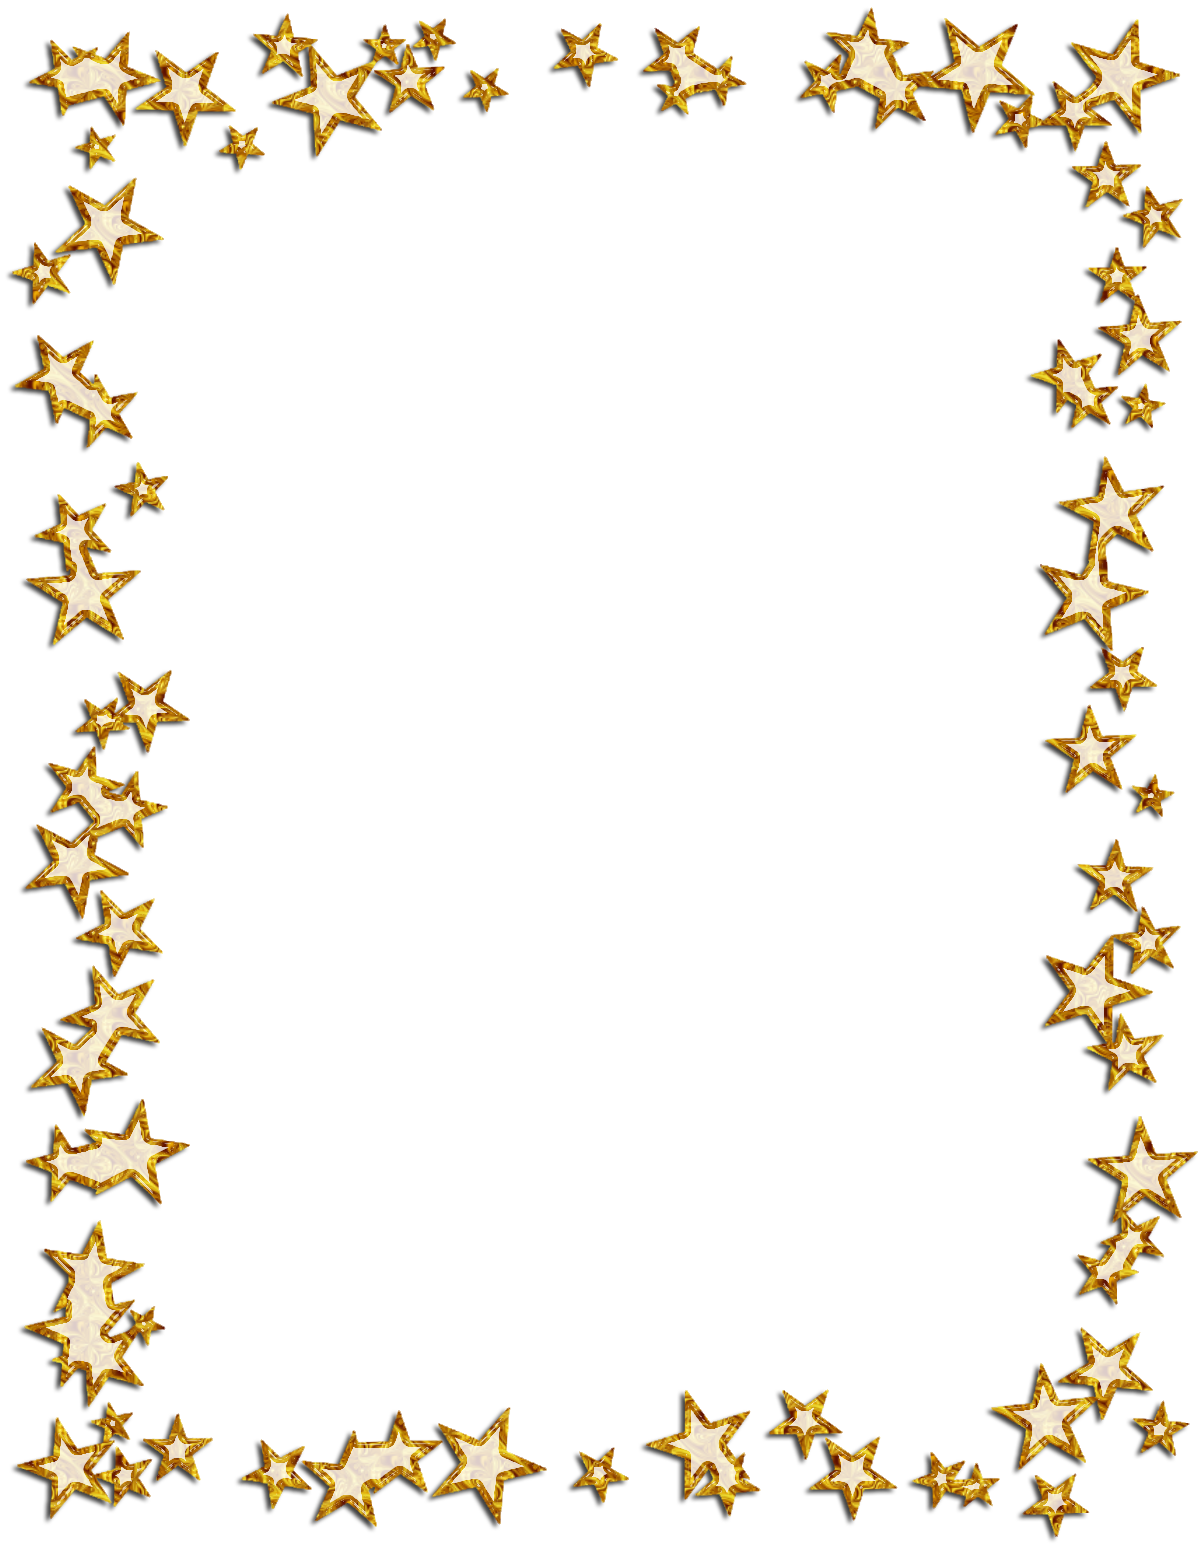 borders-and-frames-picture-frames-star-photography-clip-art-gold